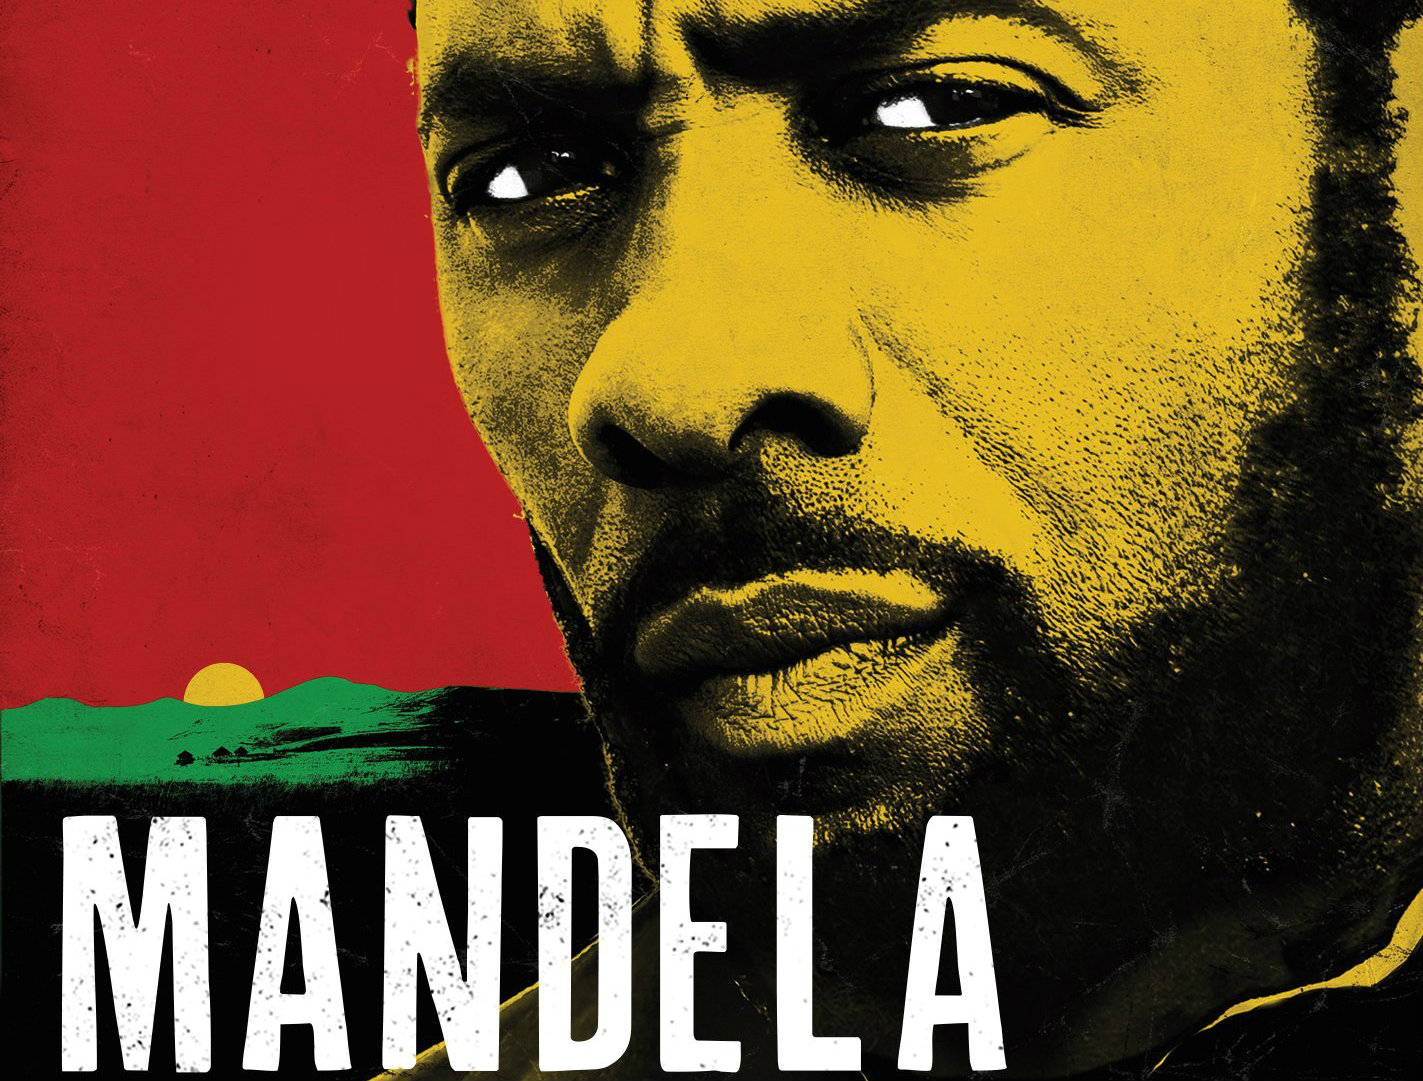 Movies inspired by the life of the great Mandela